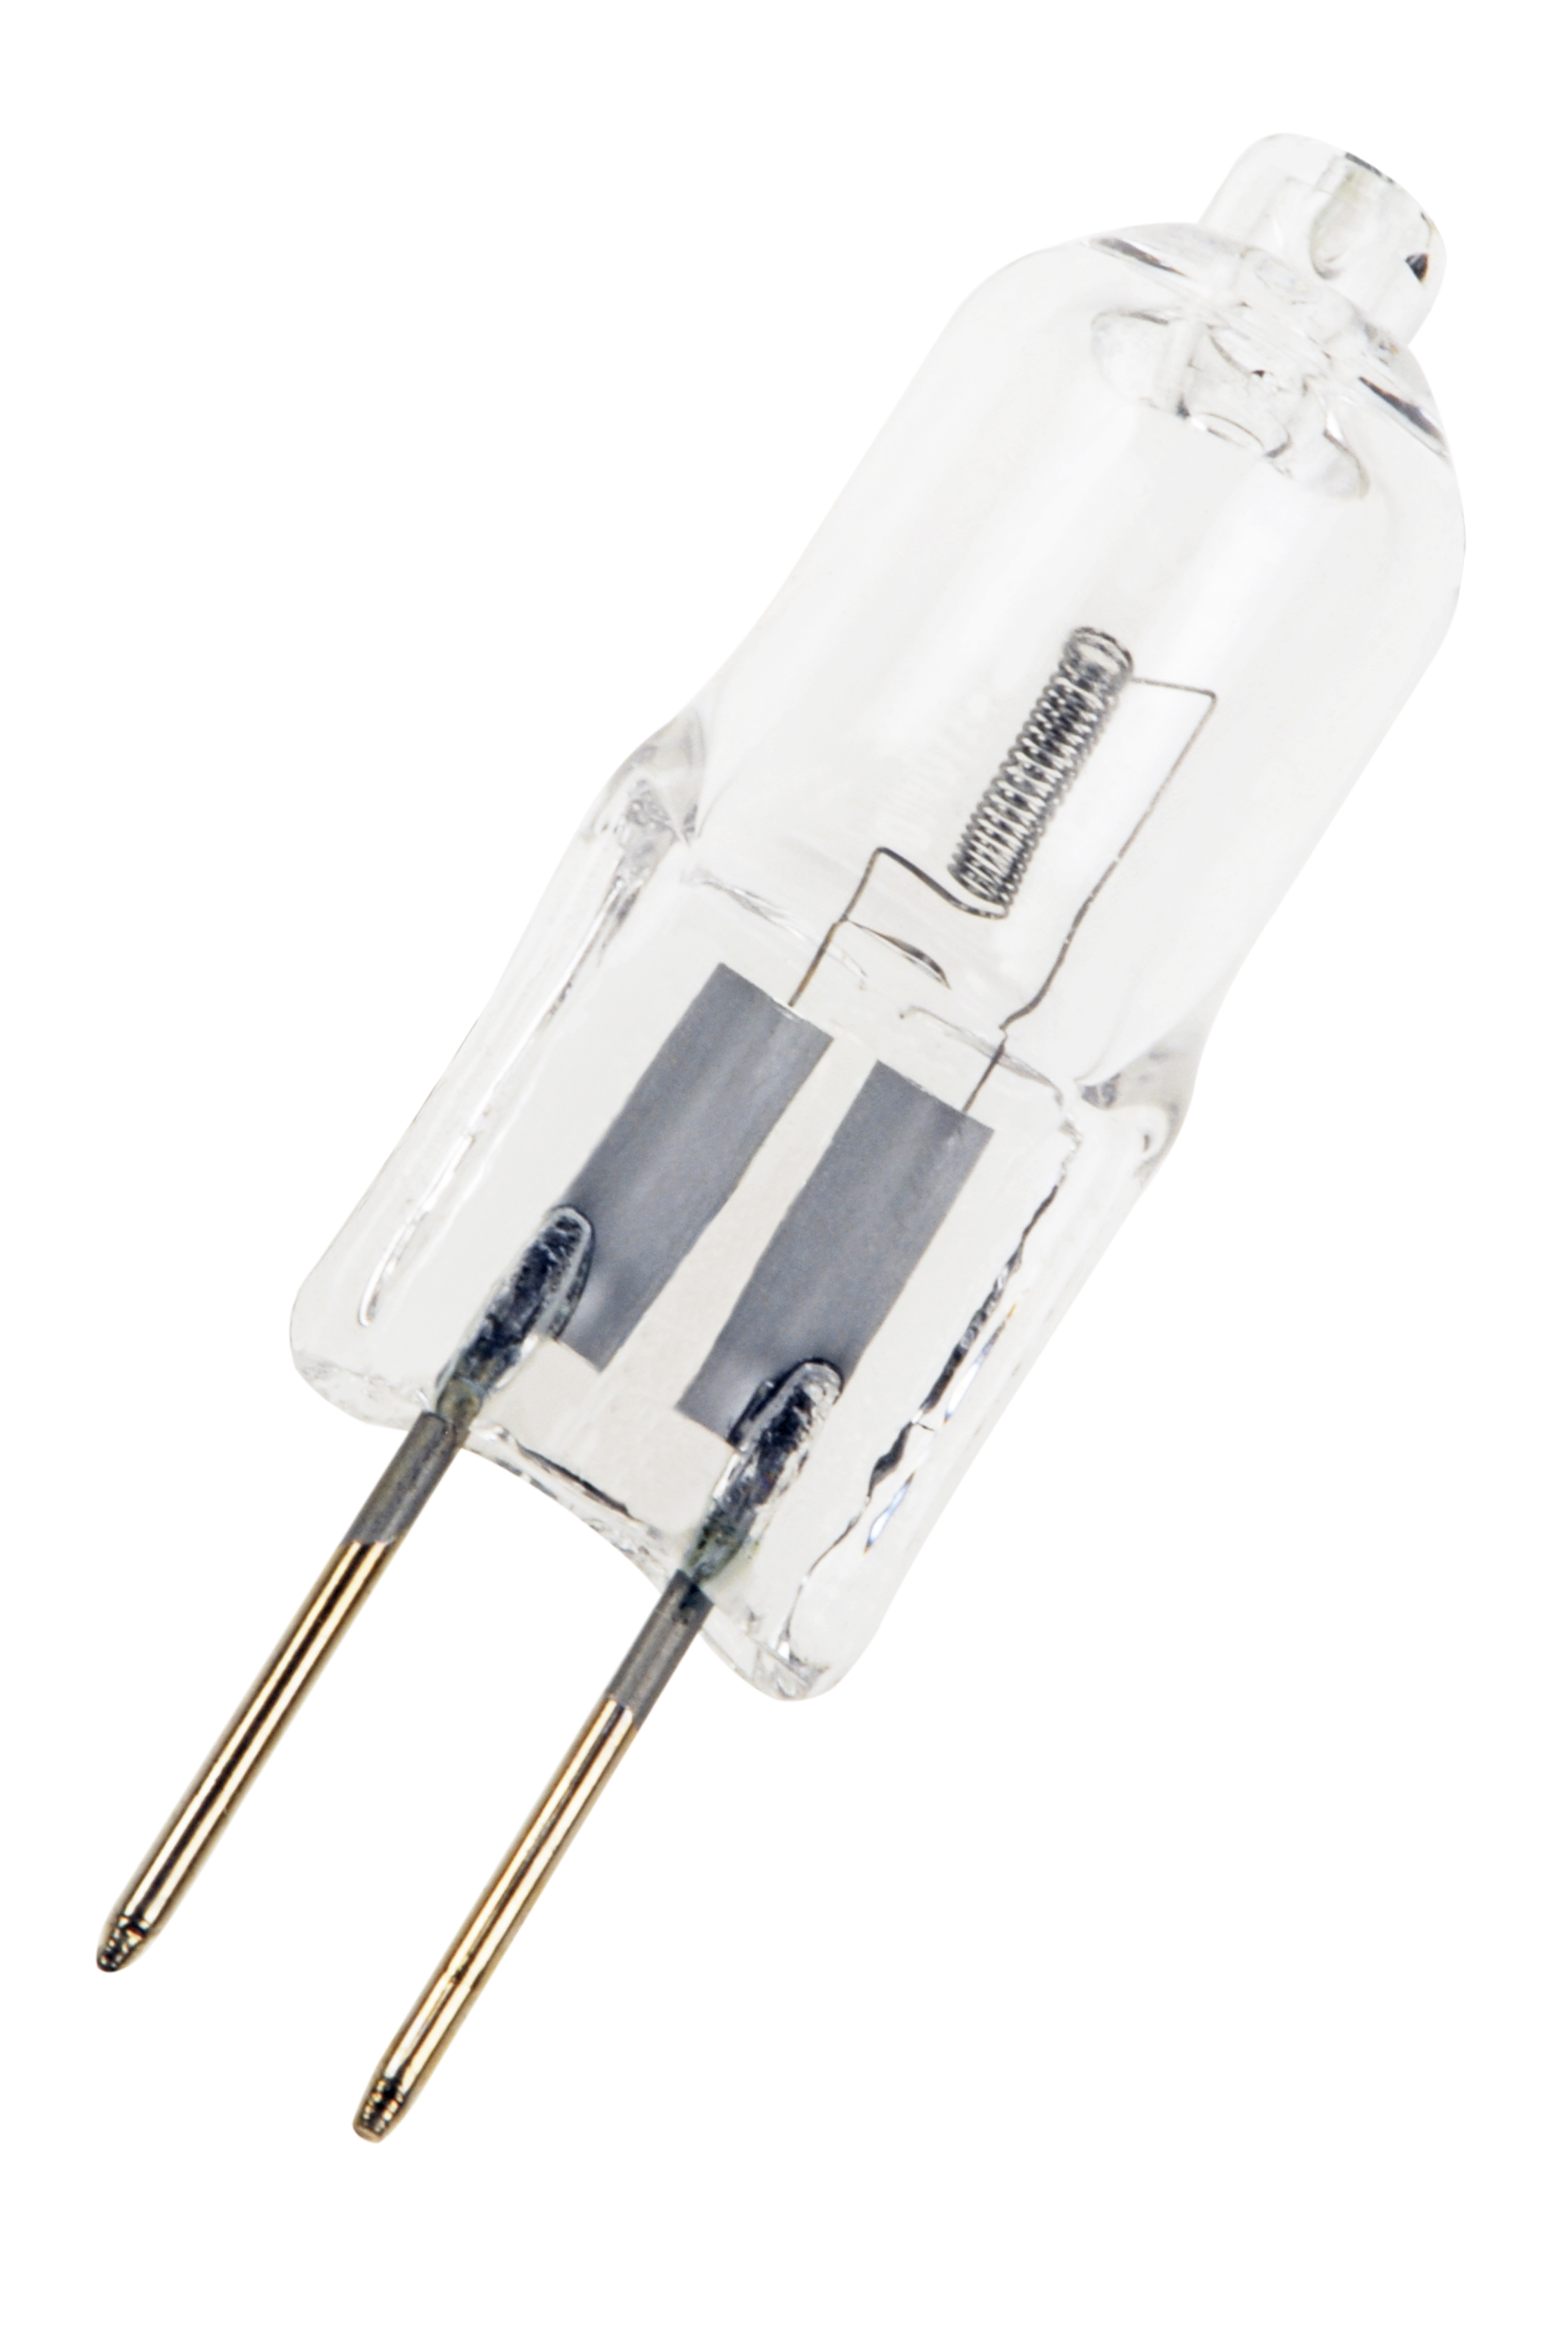 Low voltage halogen lamp without reflector